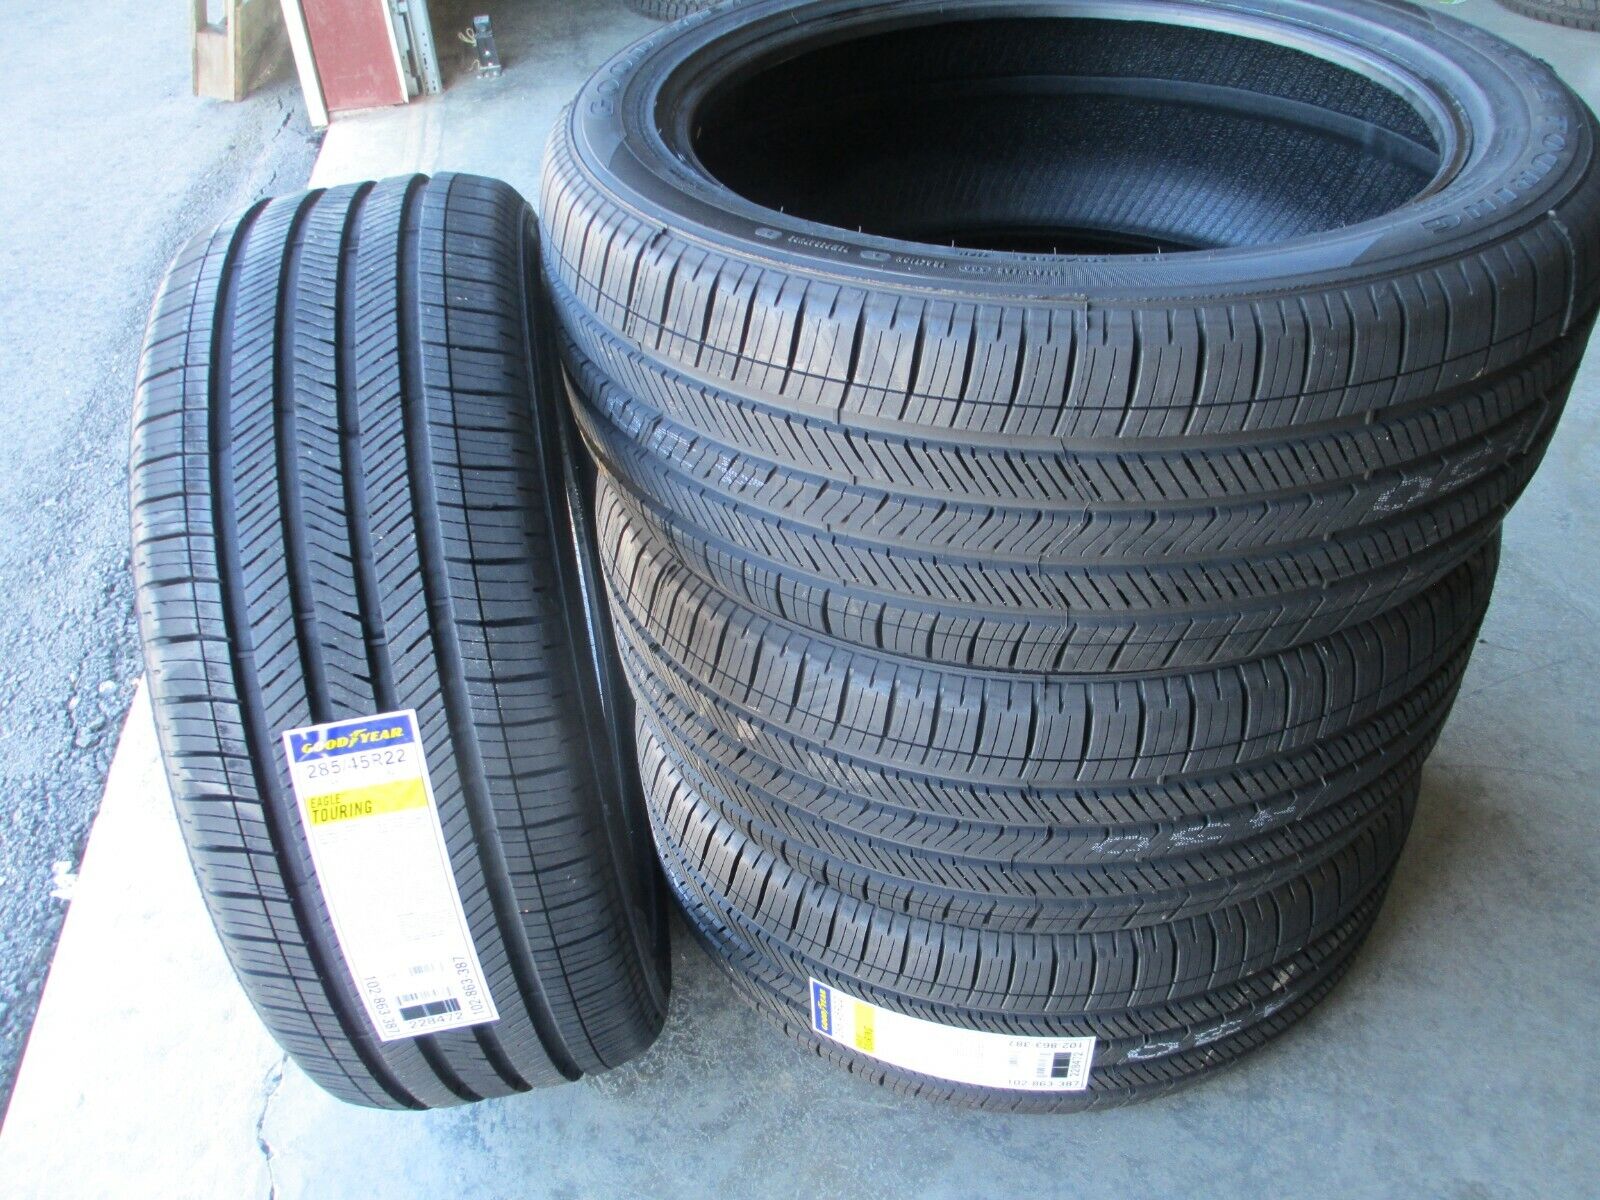 4 New 285/45R22 Goodyear Eagle Touring Tires 2854522 45 22 R22 45R Made in USA